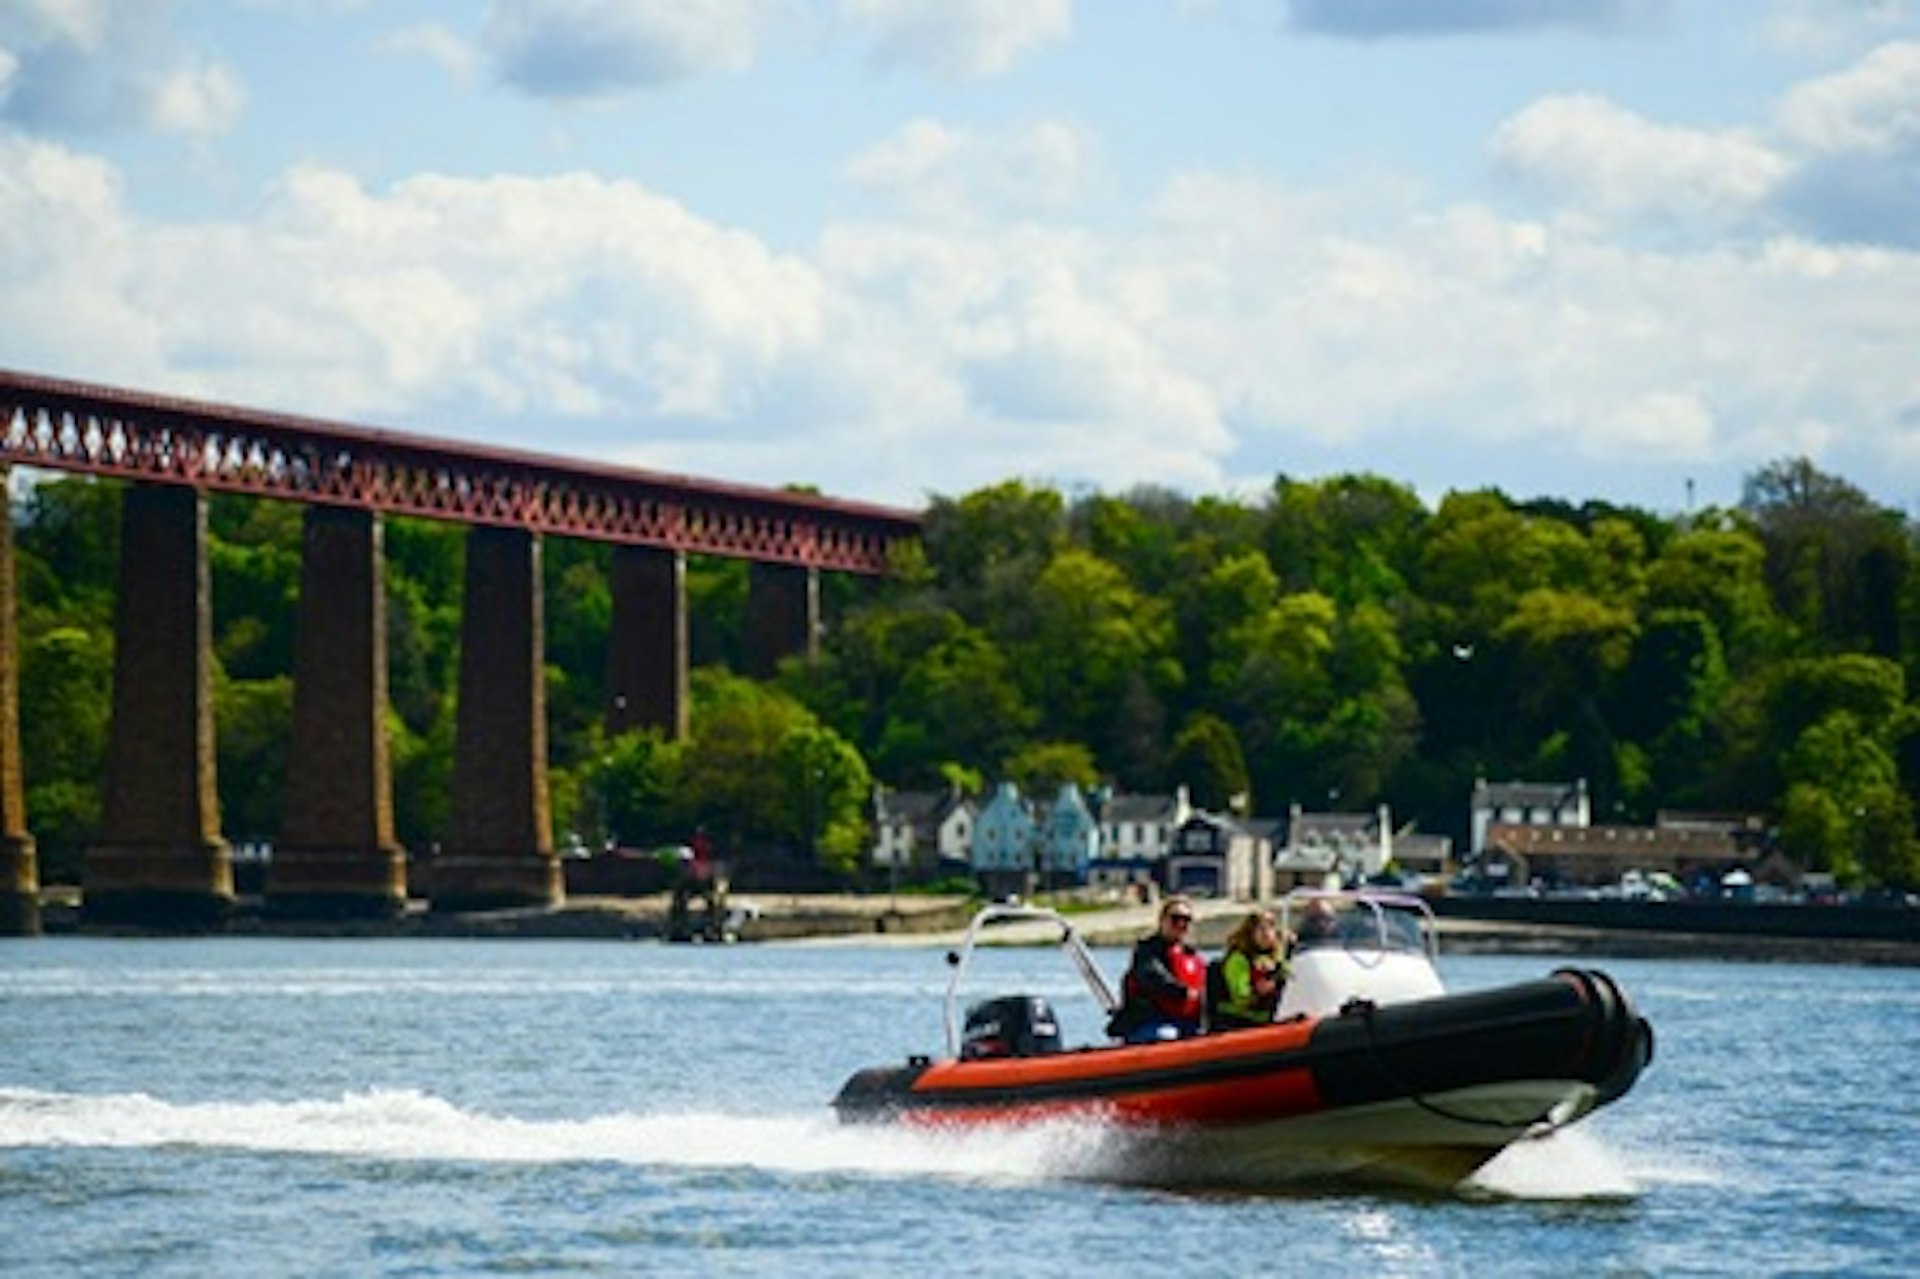 Full Day Learn to Drive a RIB Powerboat on the Forth 2